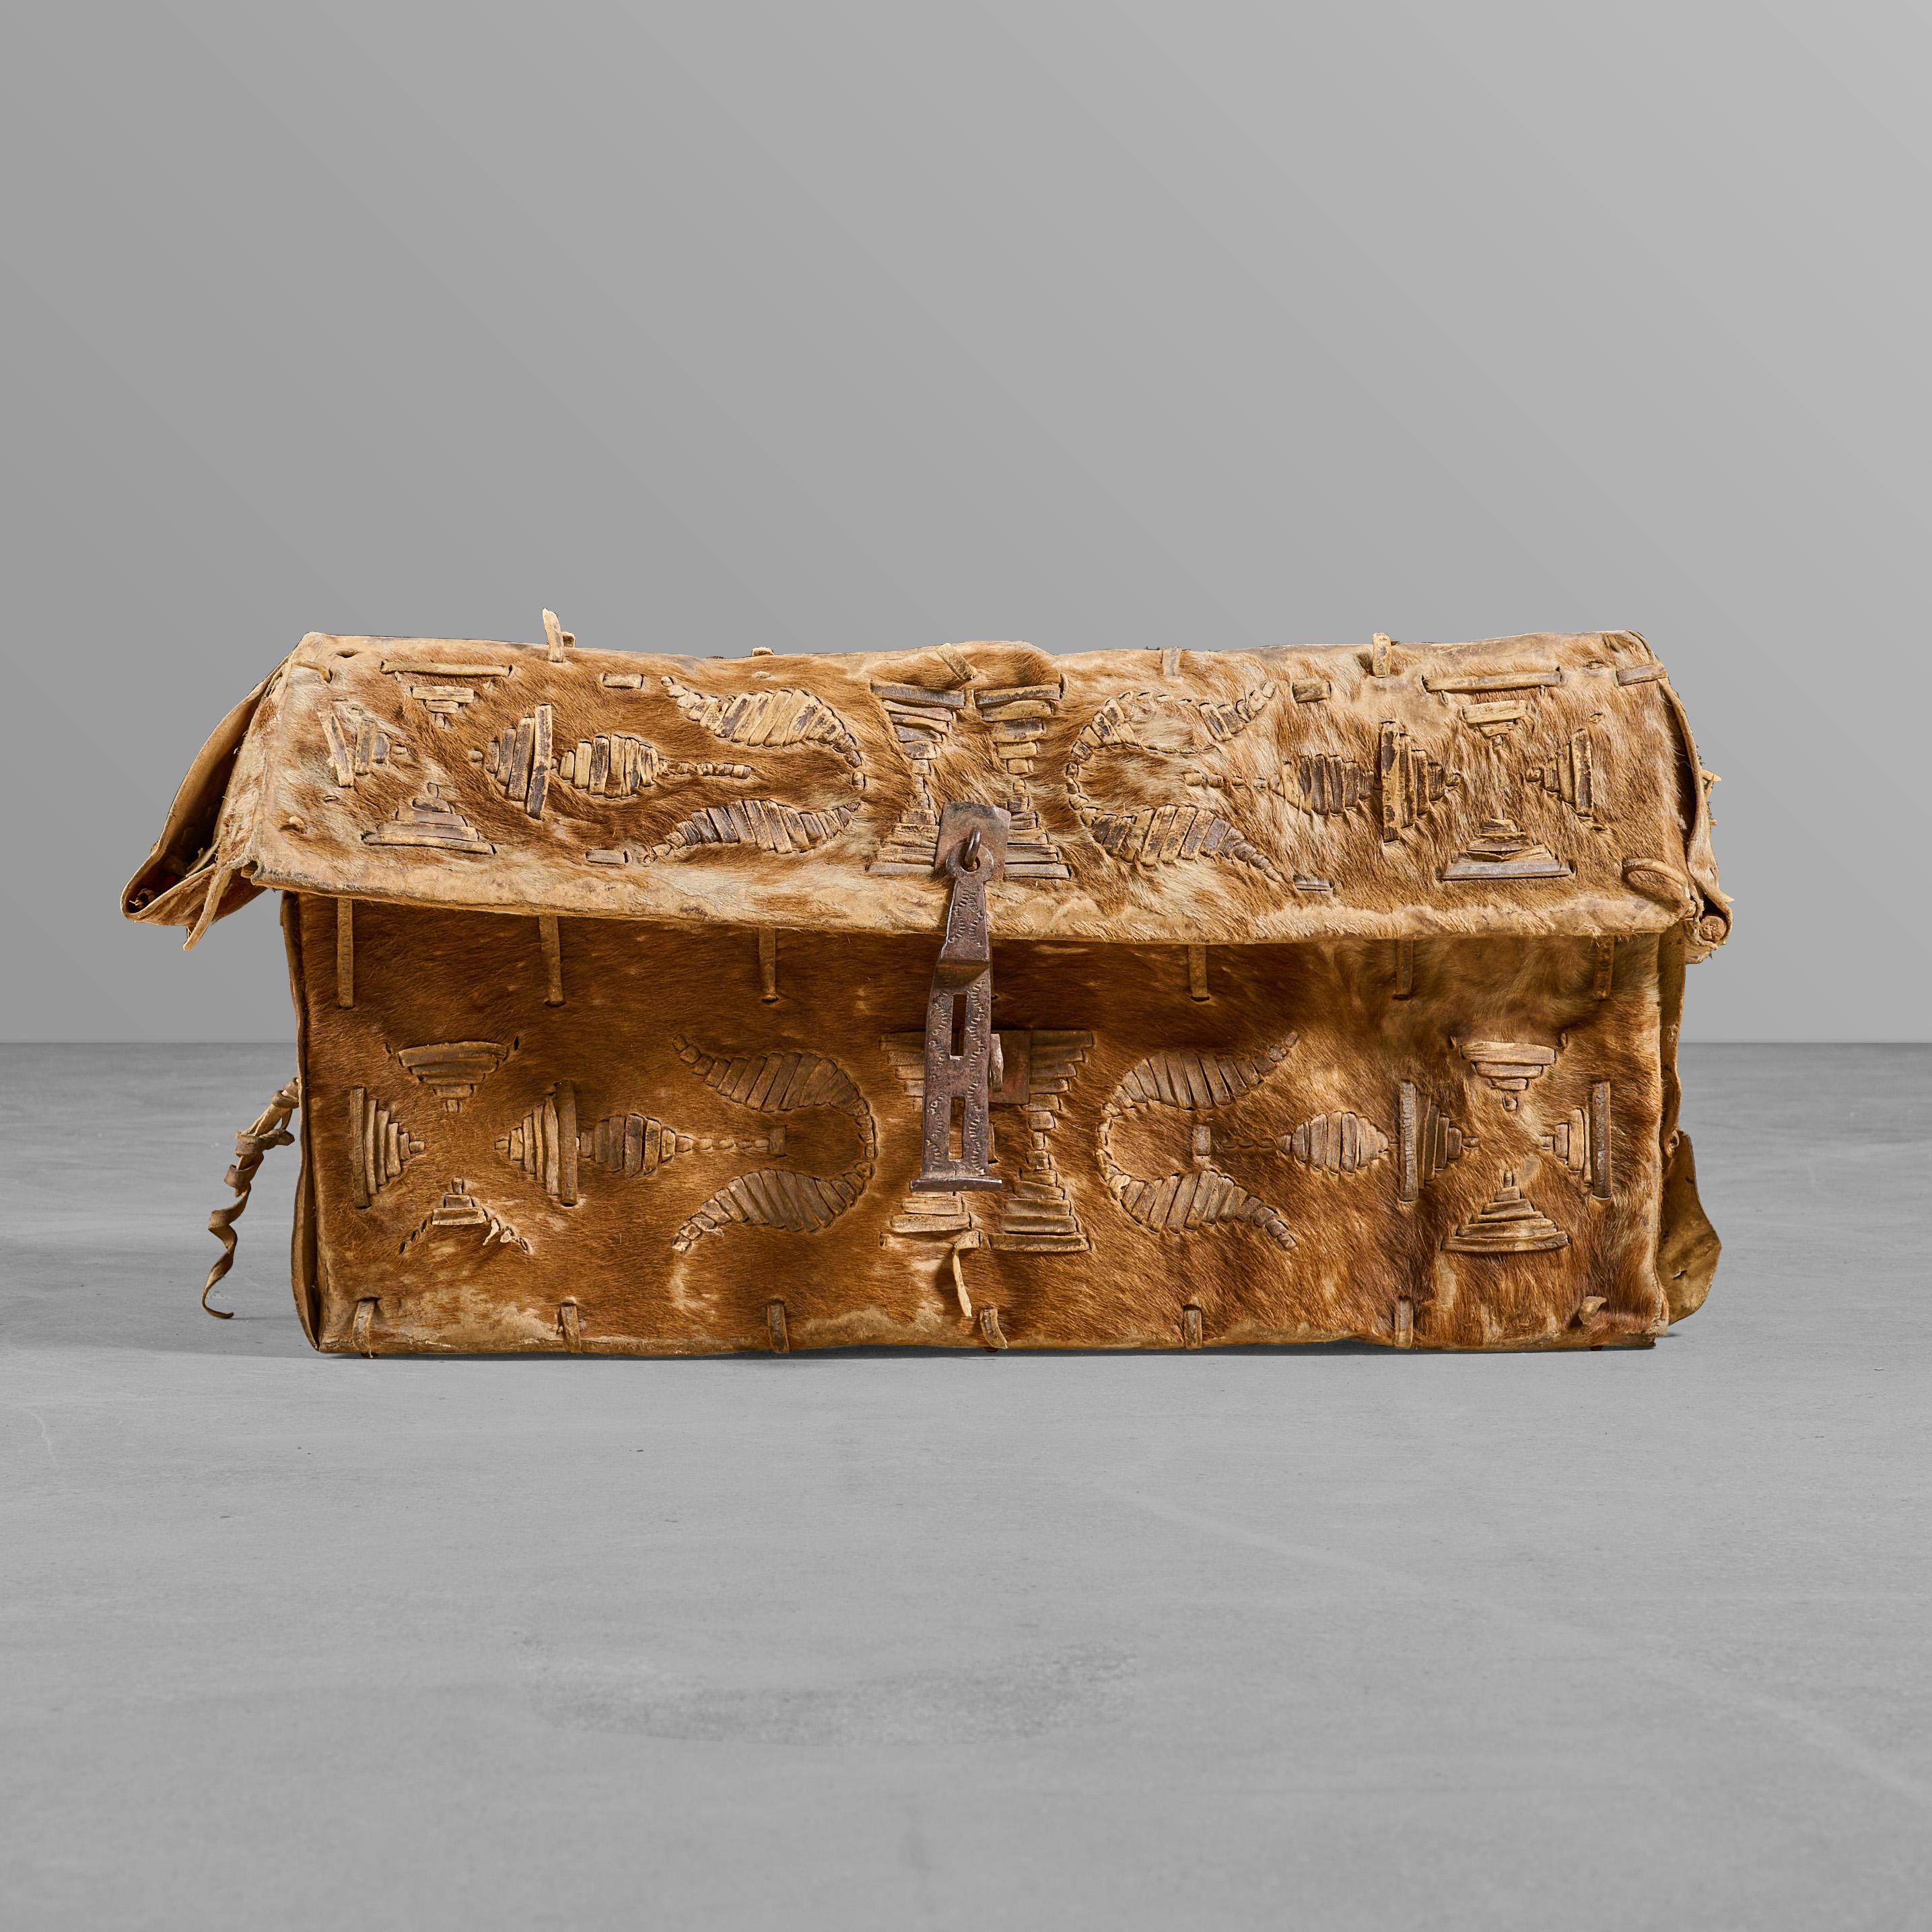 Hide trunk with fur. Made by Gauchos for storage and travel.

